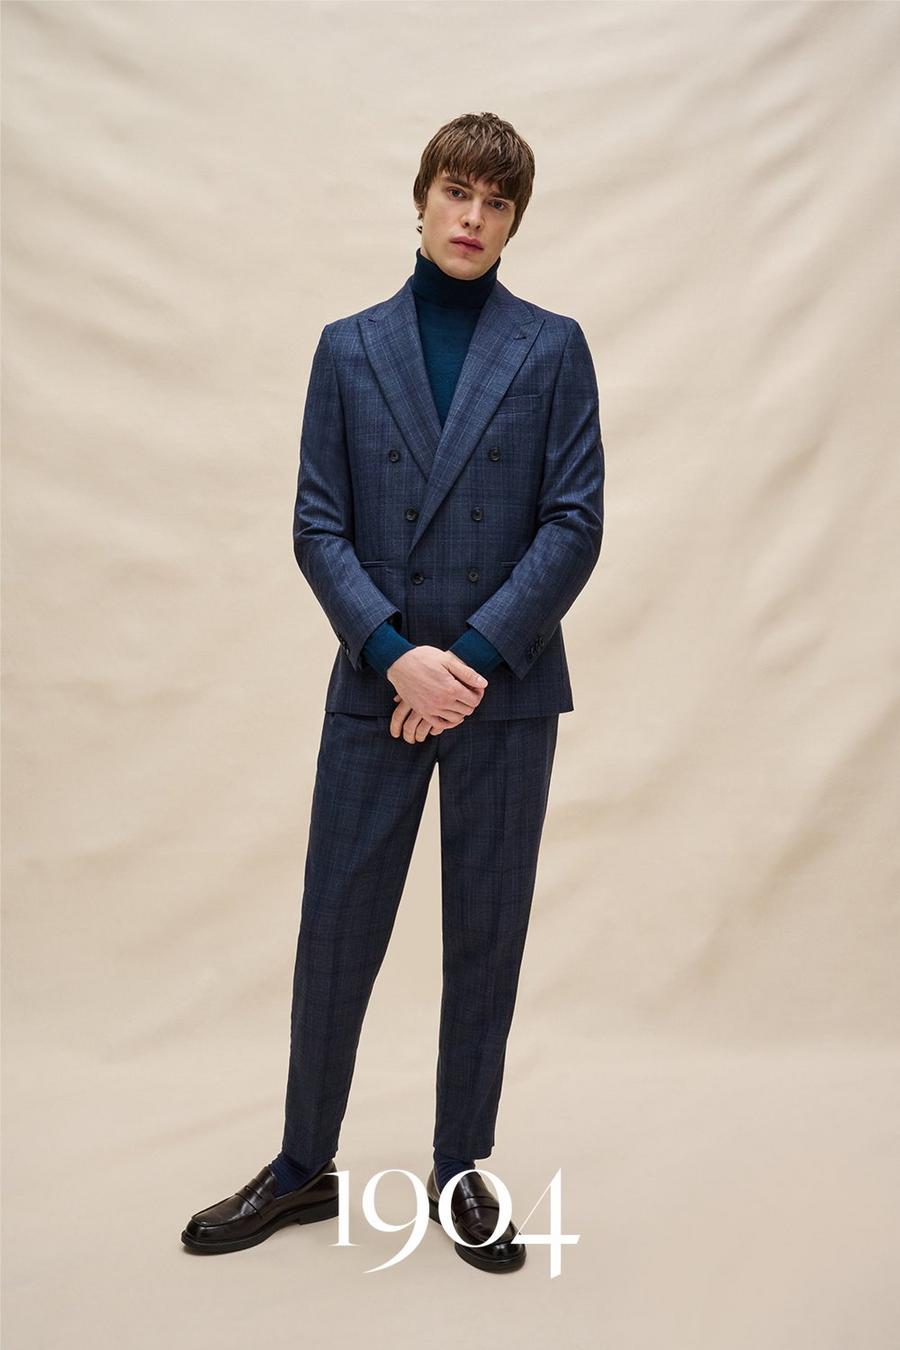 1904 Slim Fit Navy Check Double Breasted Wool Blend Suit Jacket